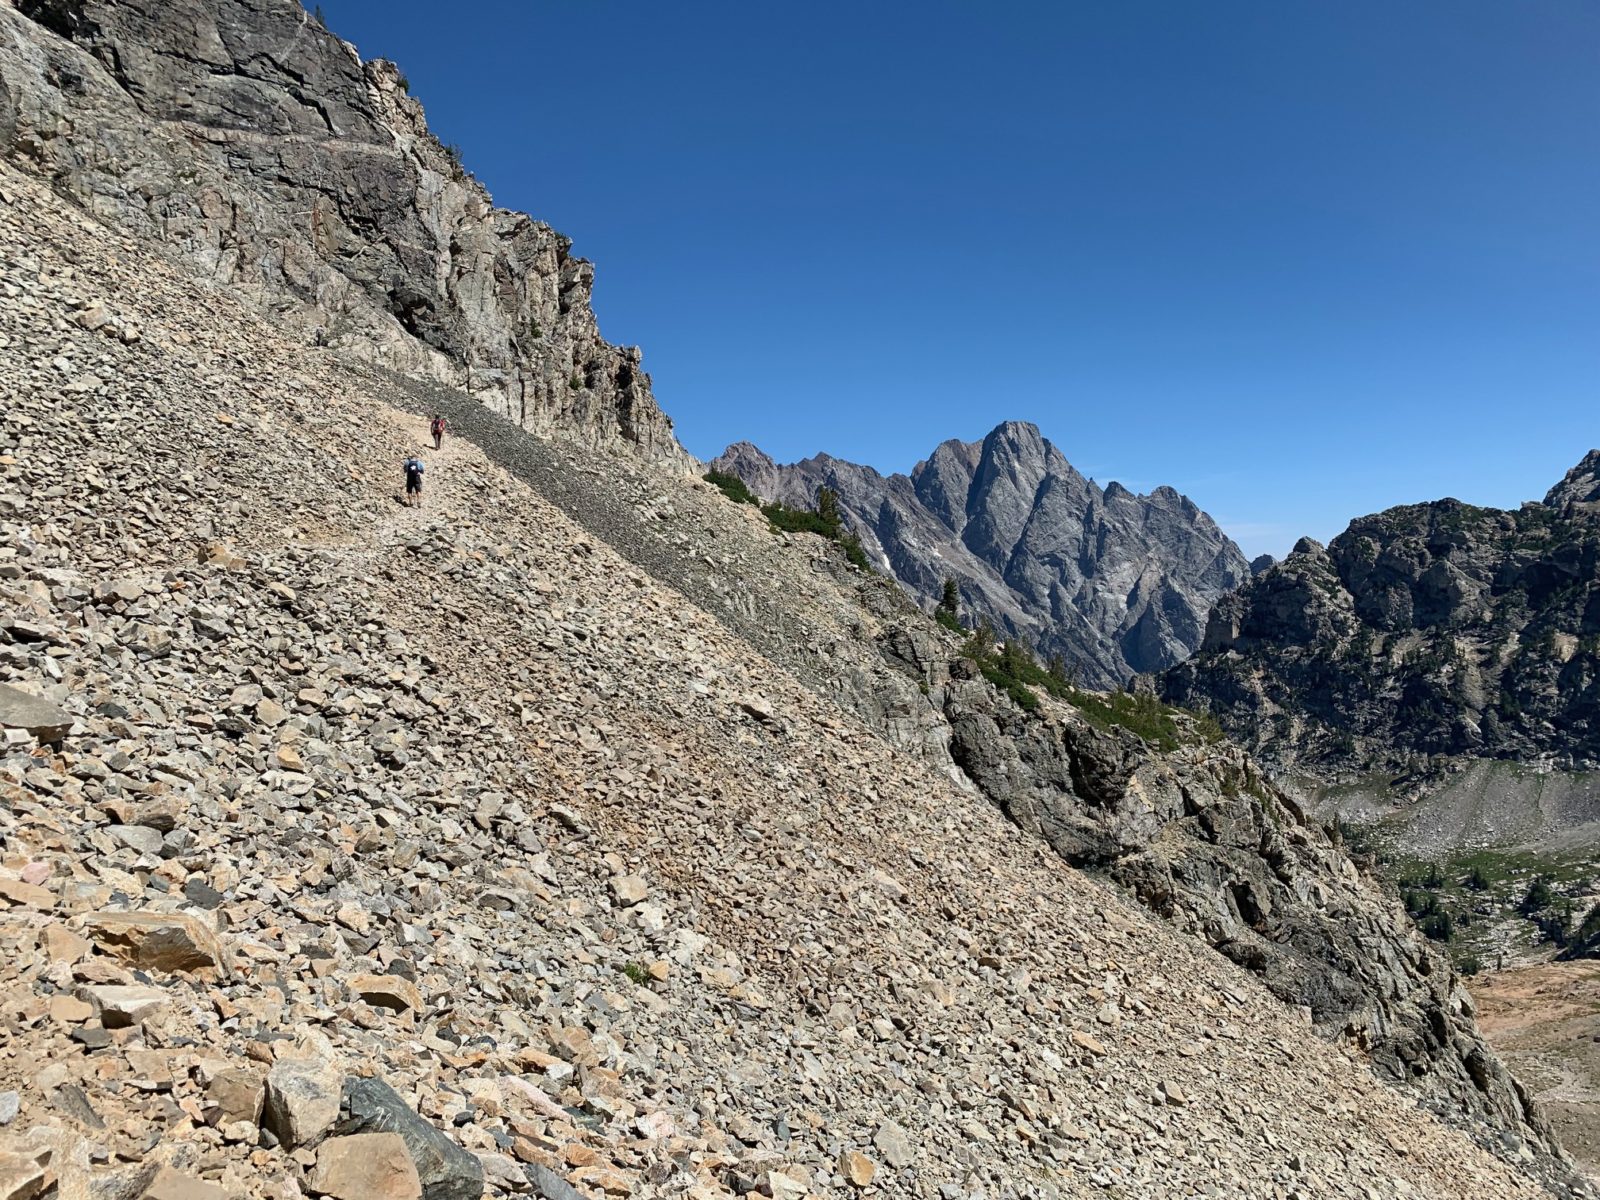 Decades of snow creep and loose rock have made the trail at Paintbrush Divide dangerous and difficult to follow.